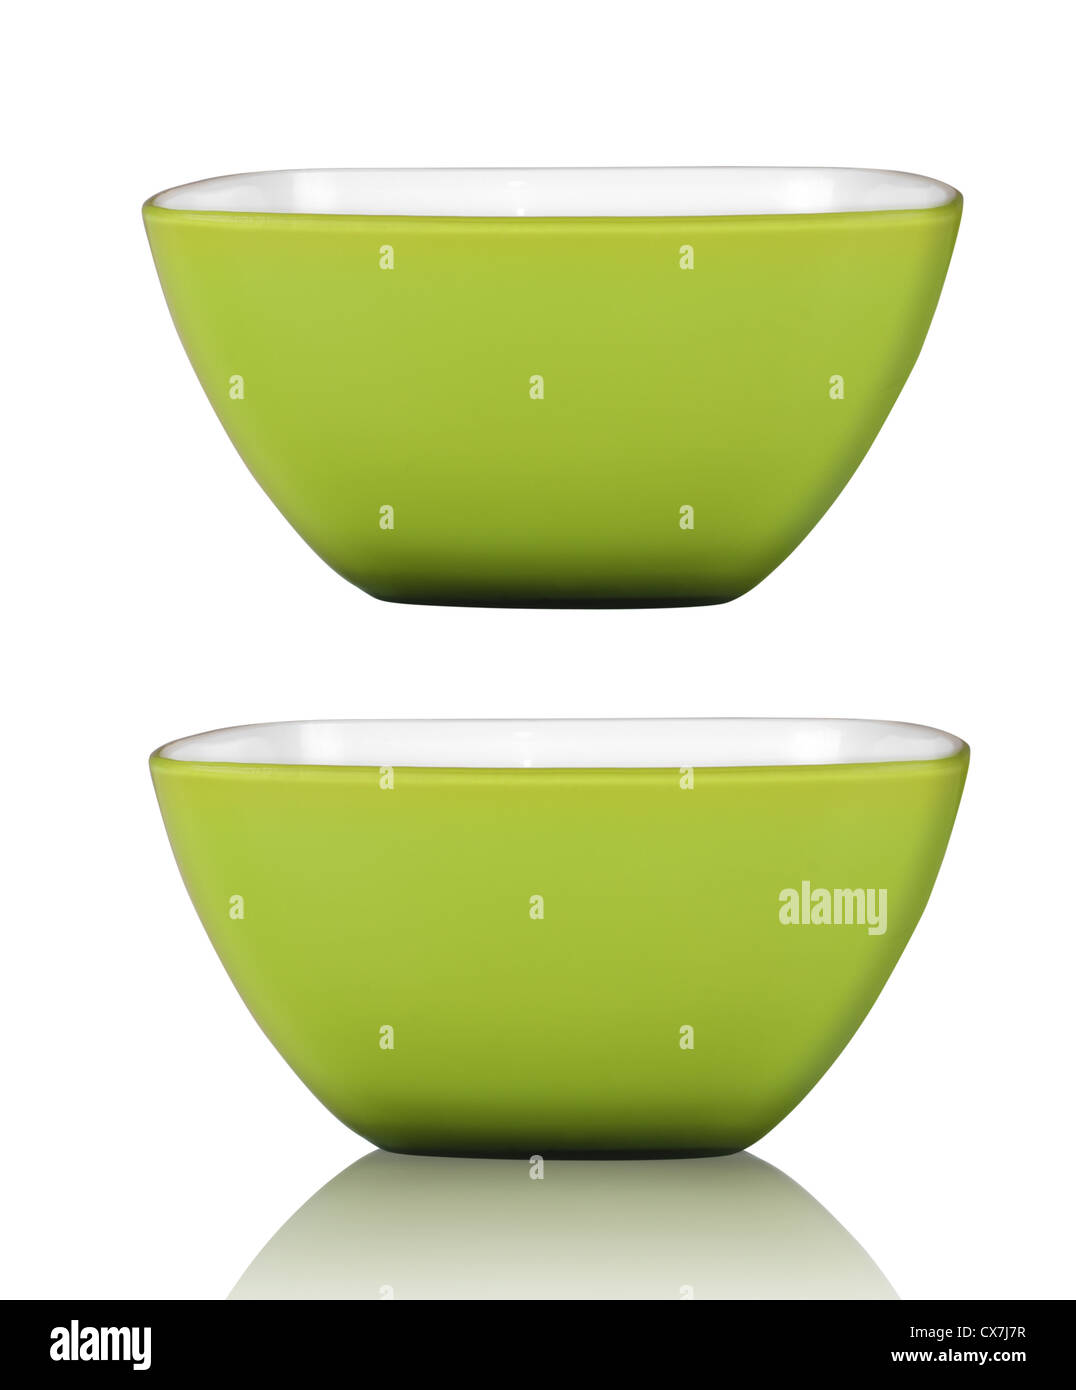 Green square bowl or cup isolated on white with clipping path included Stock Photo